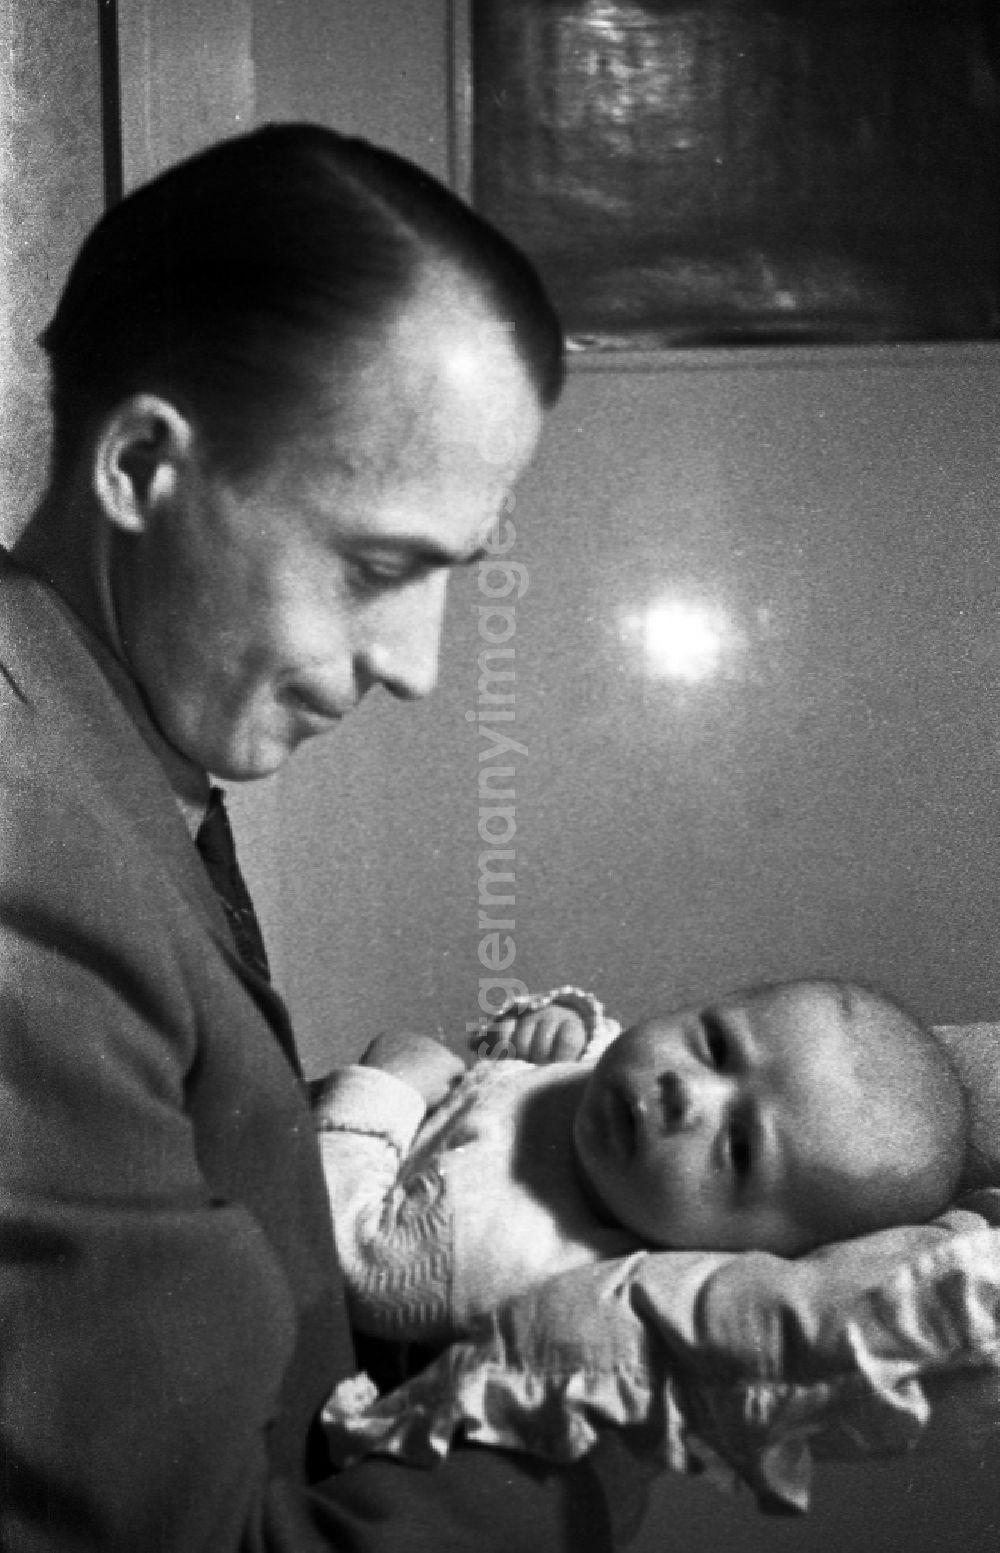 GDR photo archive: Merseburg - A father holds proudly his baby on the arm in Merseburg in the federal state Saxony-Anhalt in the area of the former GDR, German democratic republic